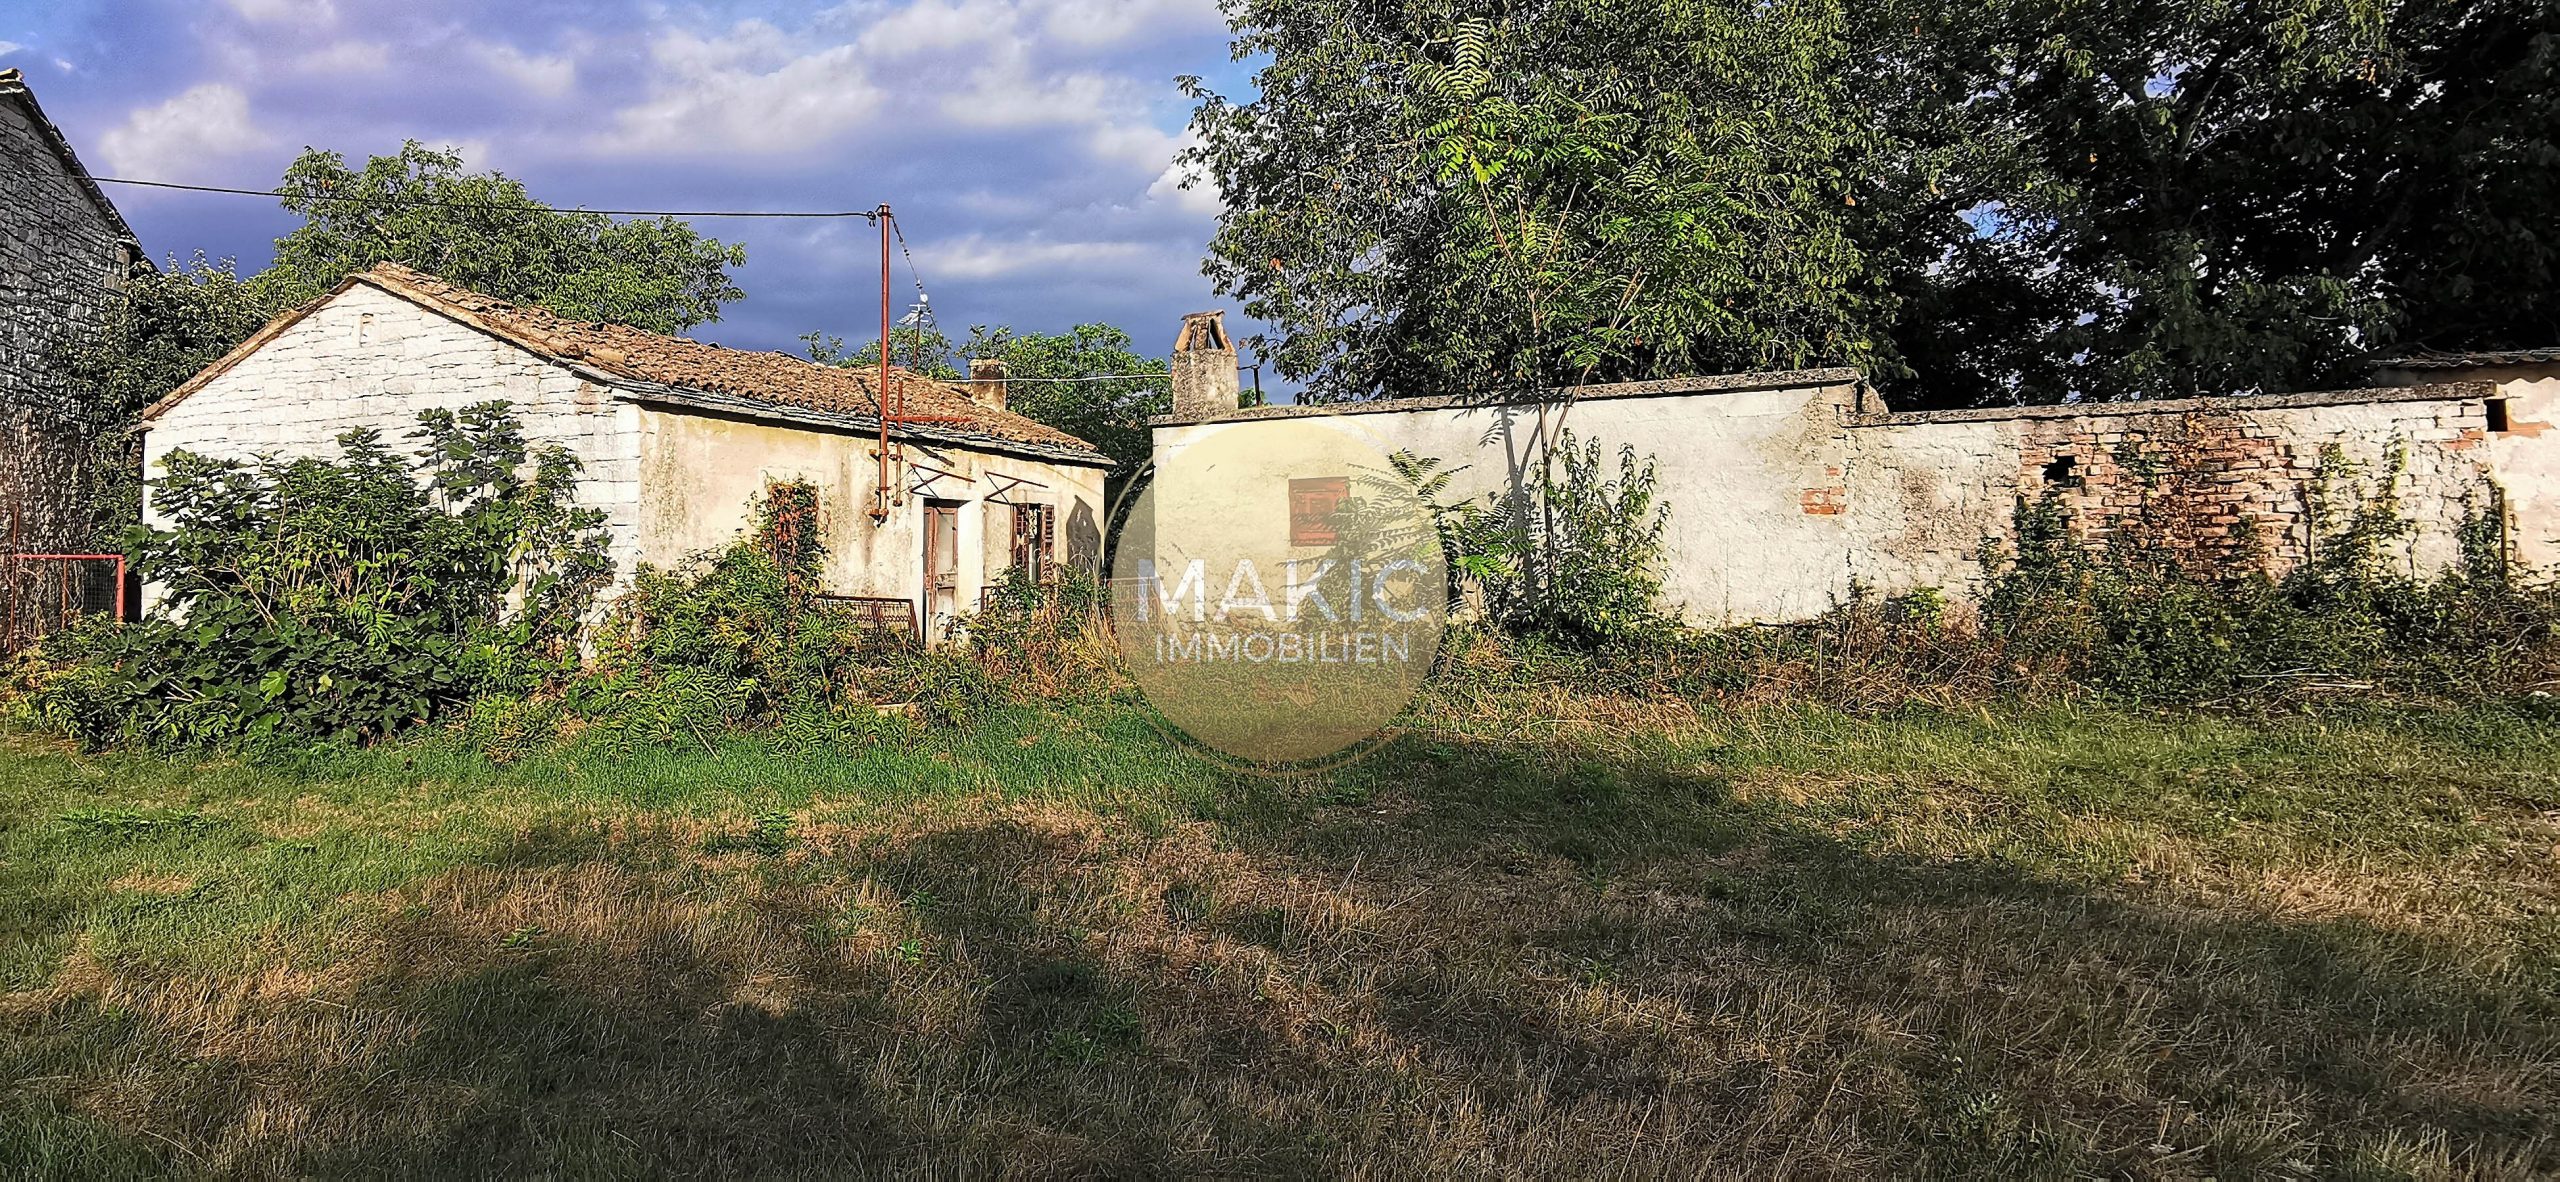 ISTRIA – SMALL HOUSE FOR RENOVATION IN THE HEART OF ISTRIA